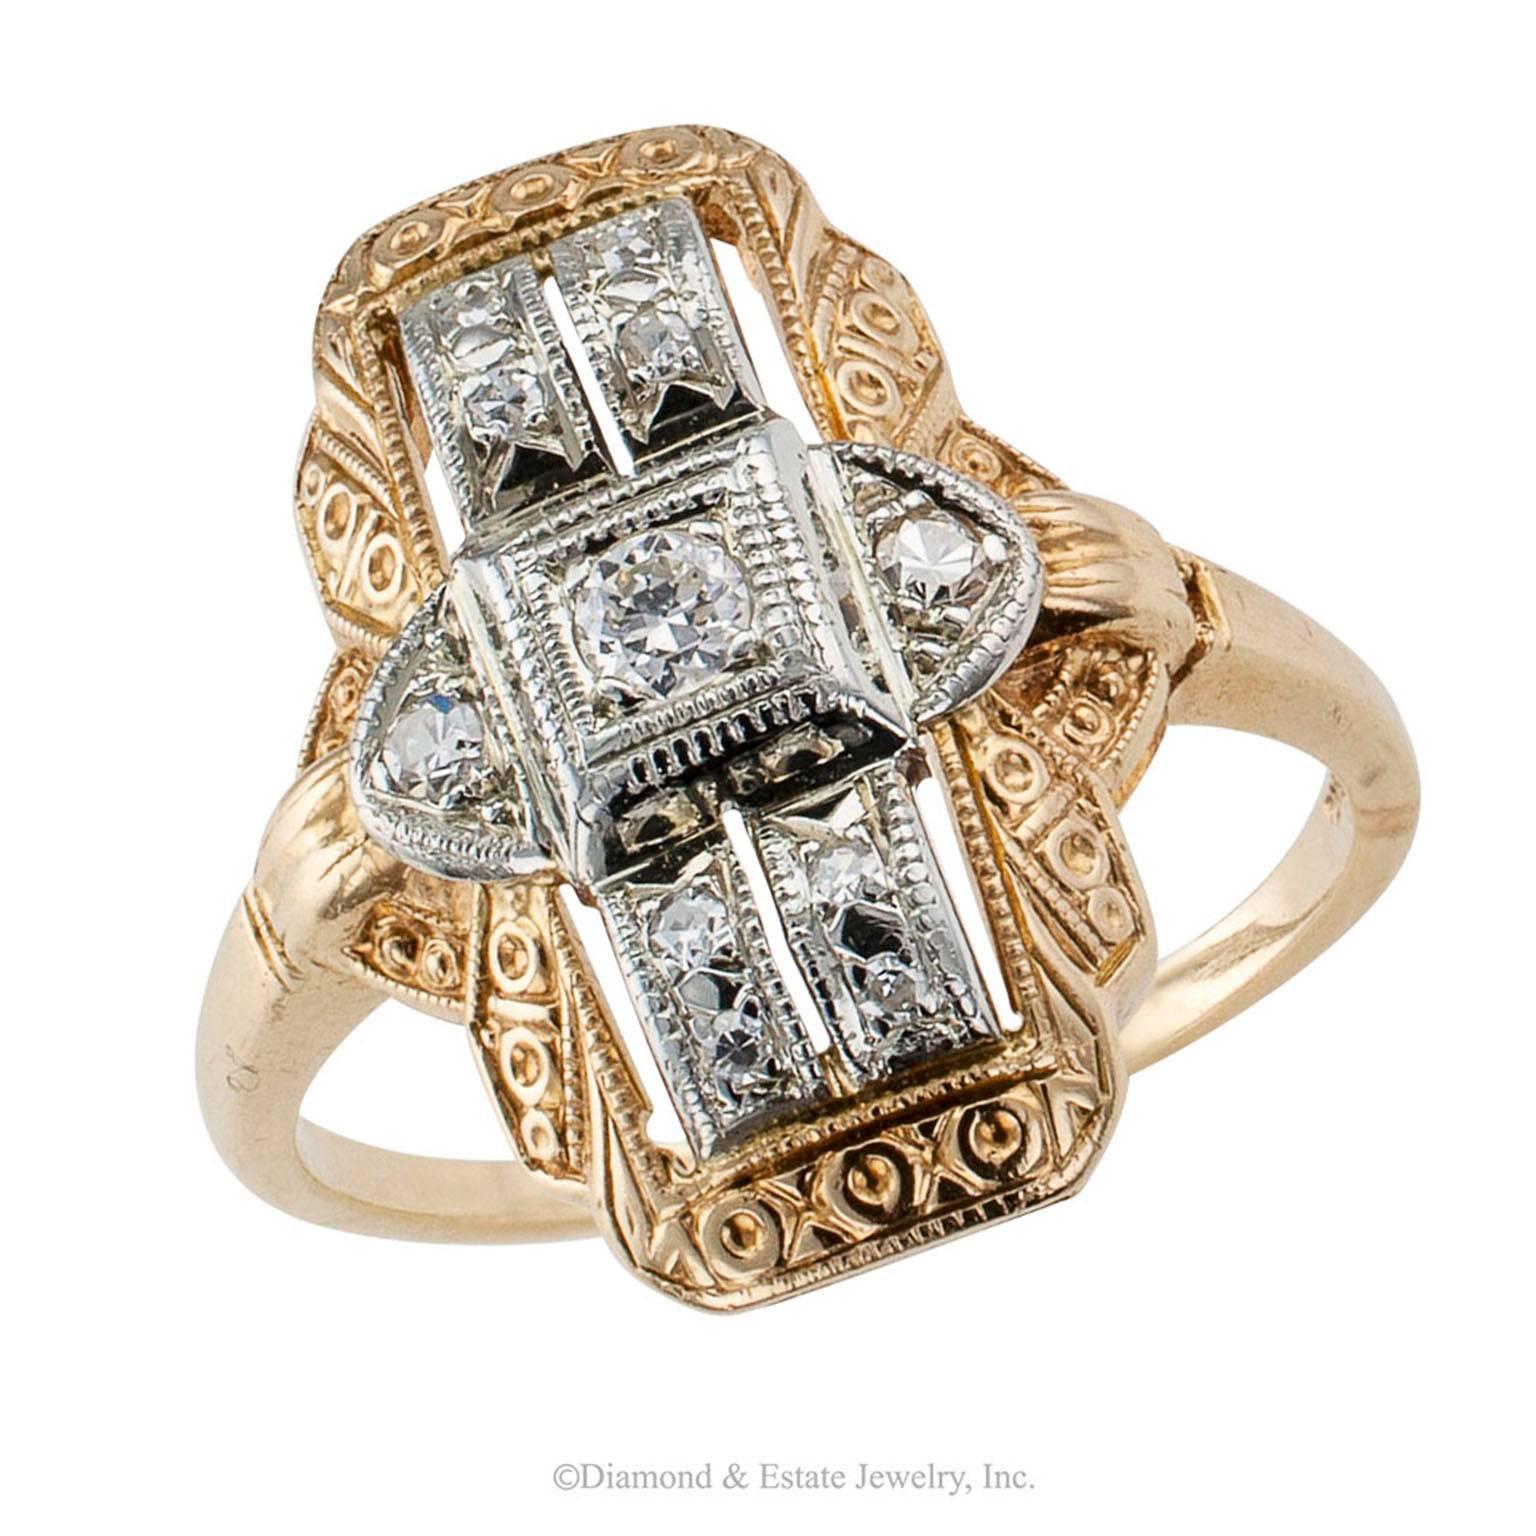 Art Deco 1930s Two-tone Gold Diamond Dinner Ring

Art Deco 1930s two-tone gold and diamond dinner ring with Jabel maker's mark.  Featuring a stepped, central white gold plaque set with diamonds totaling approximately 0.15 carat, within a conforming